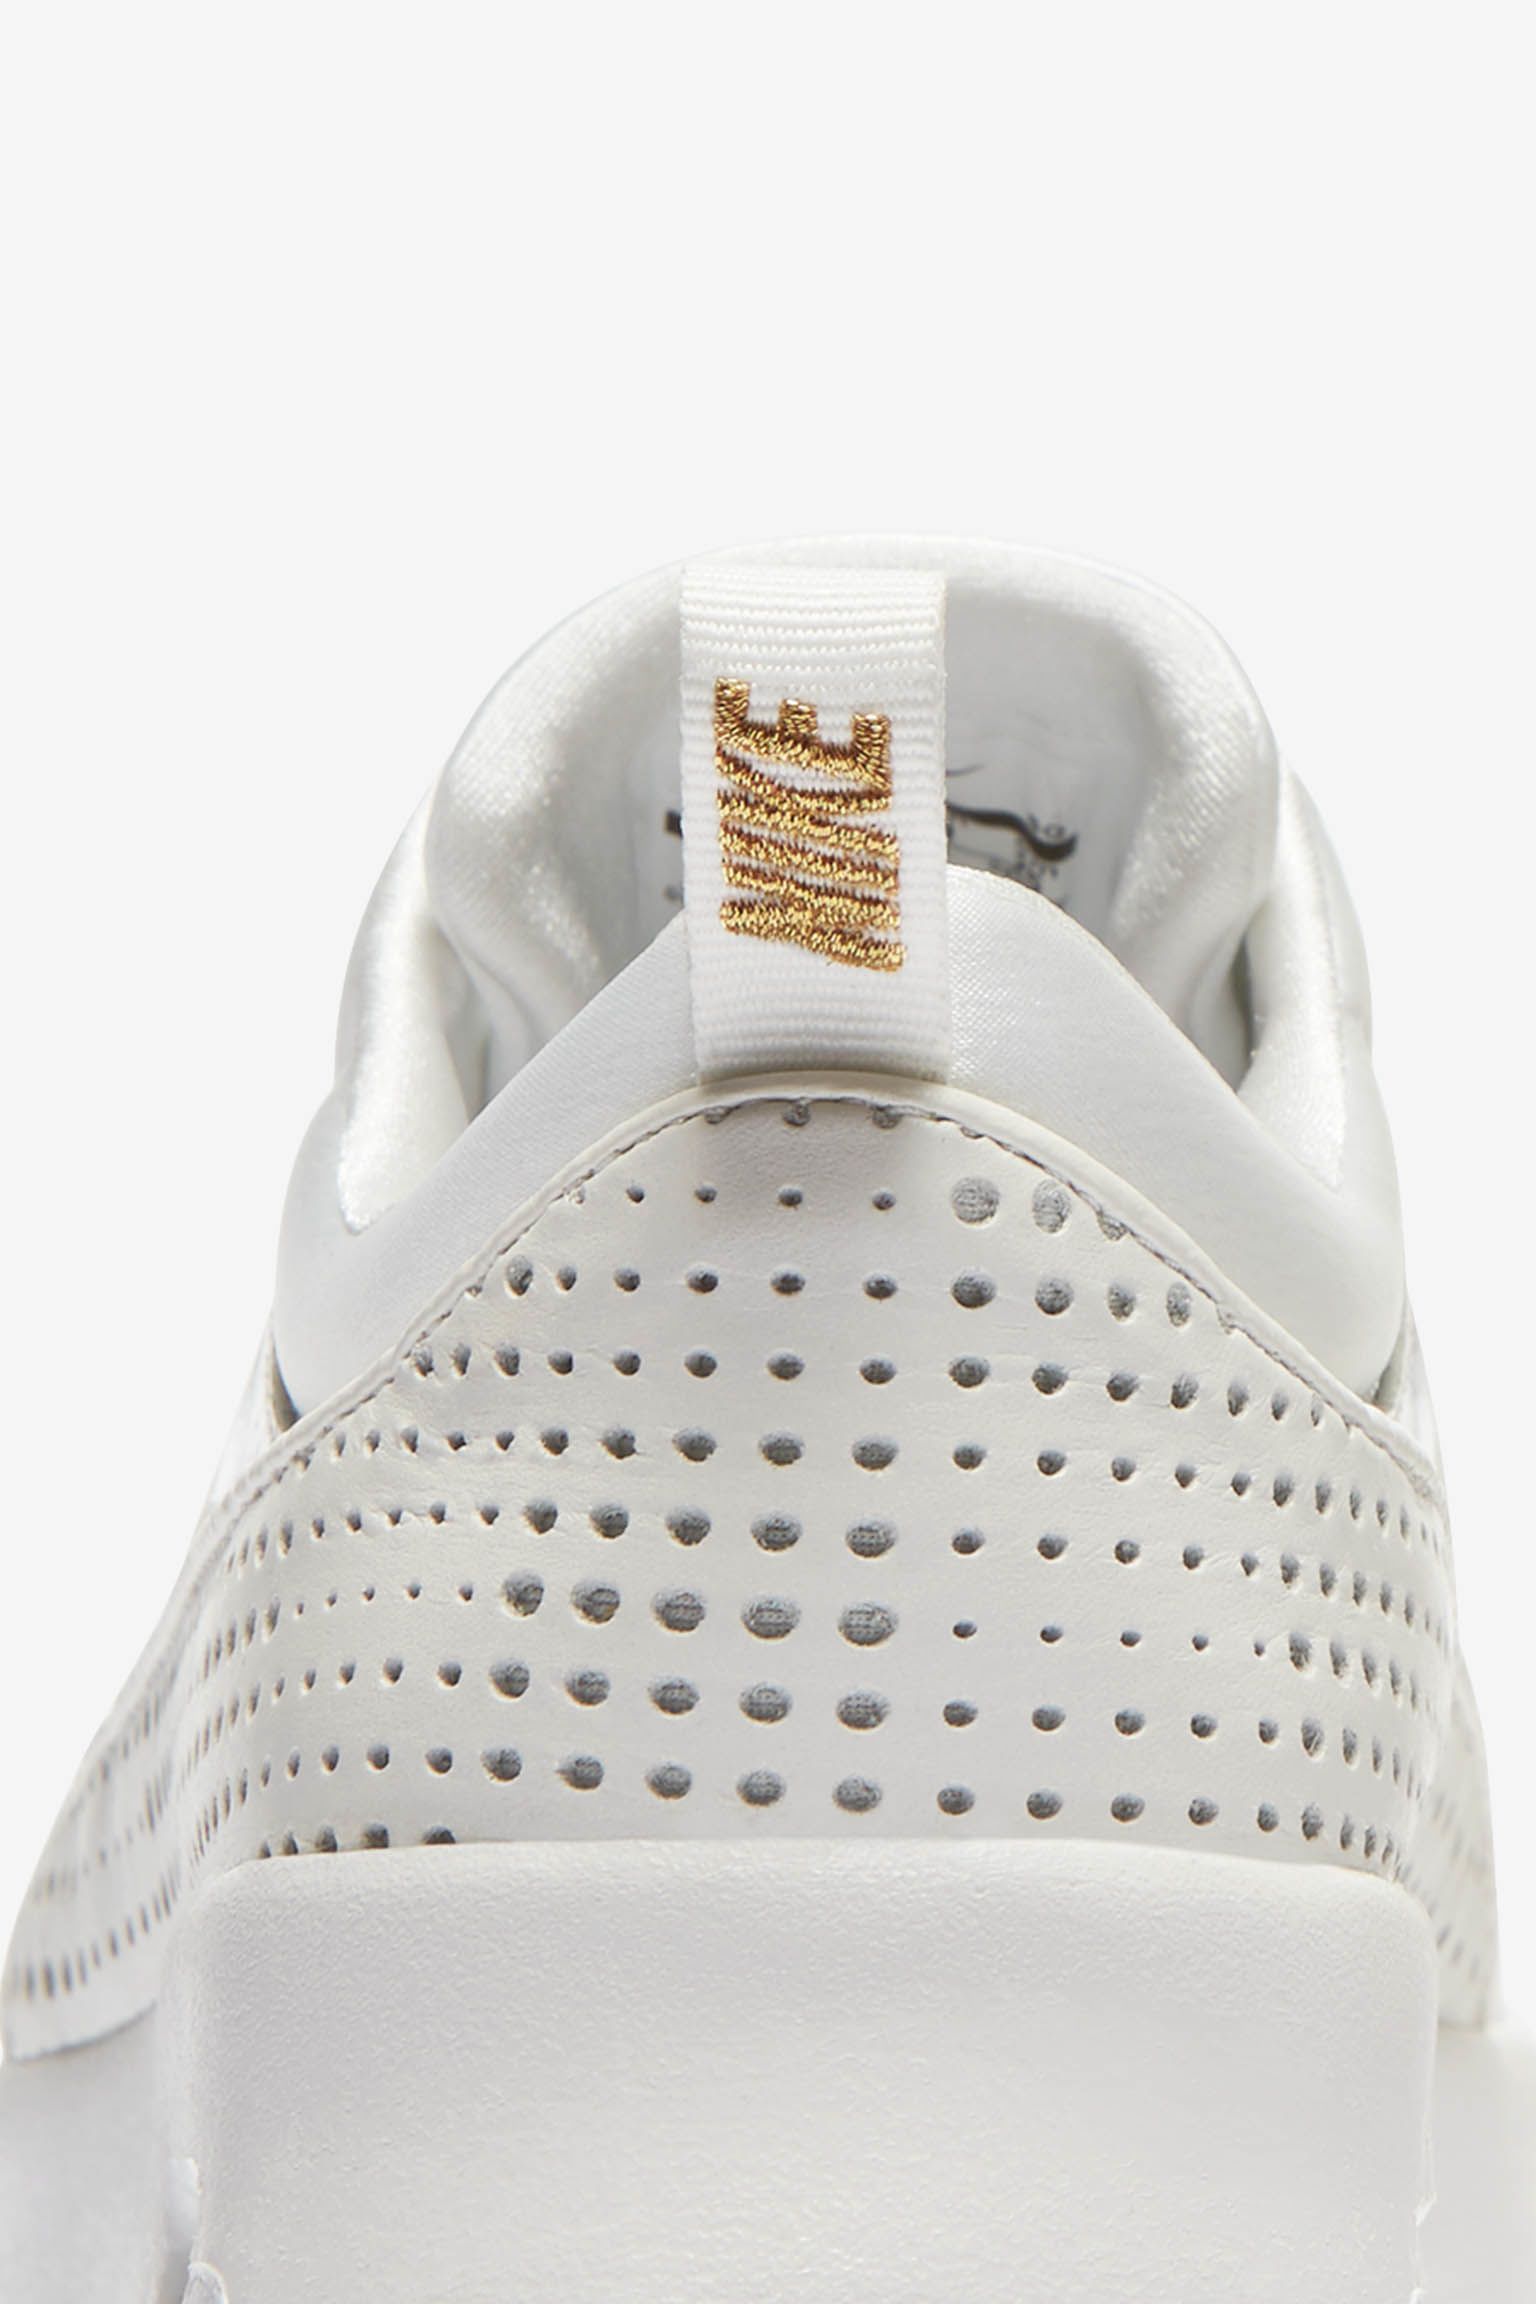 white & gold air max thea trainers